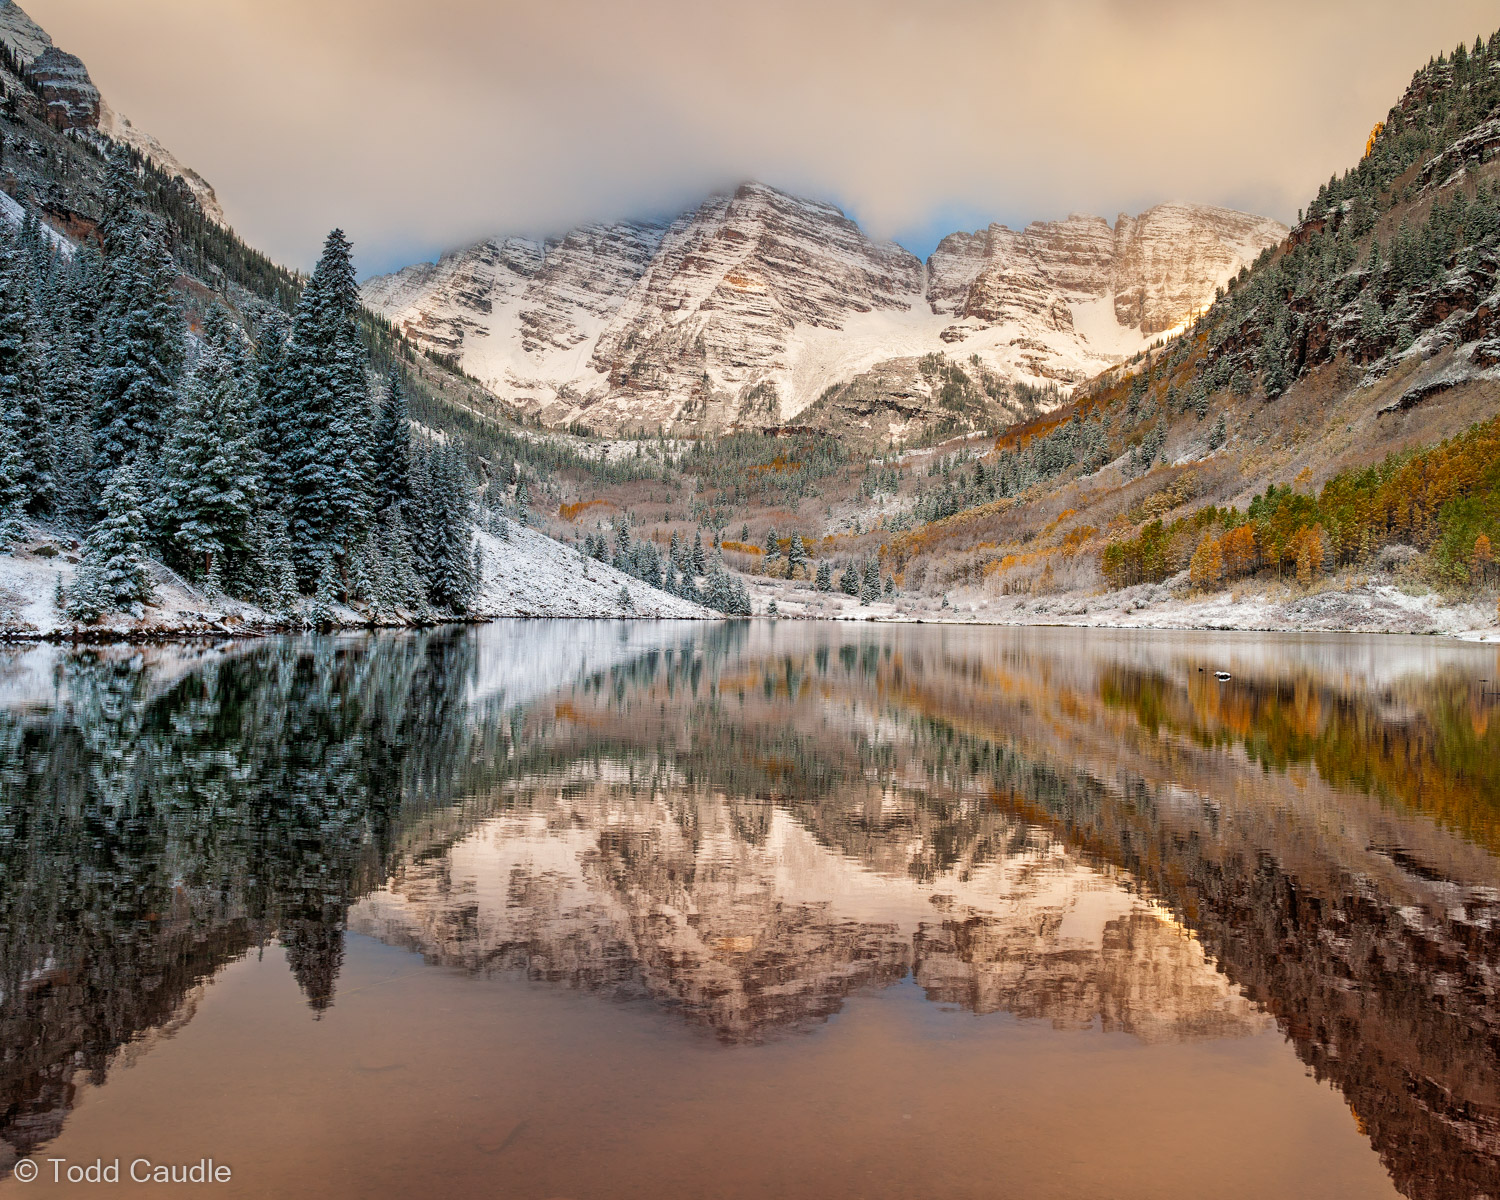 An overnight dusting of snow makes the scene at Maroon Lake, with the famous Maroon Bells reflecting in its calm waters, all...